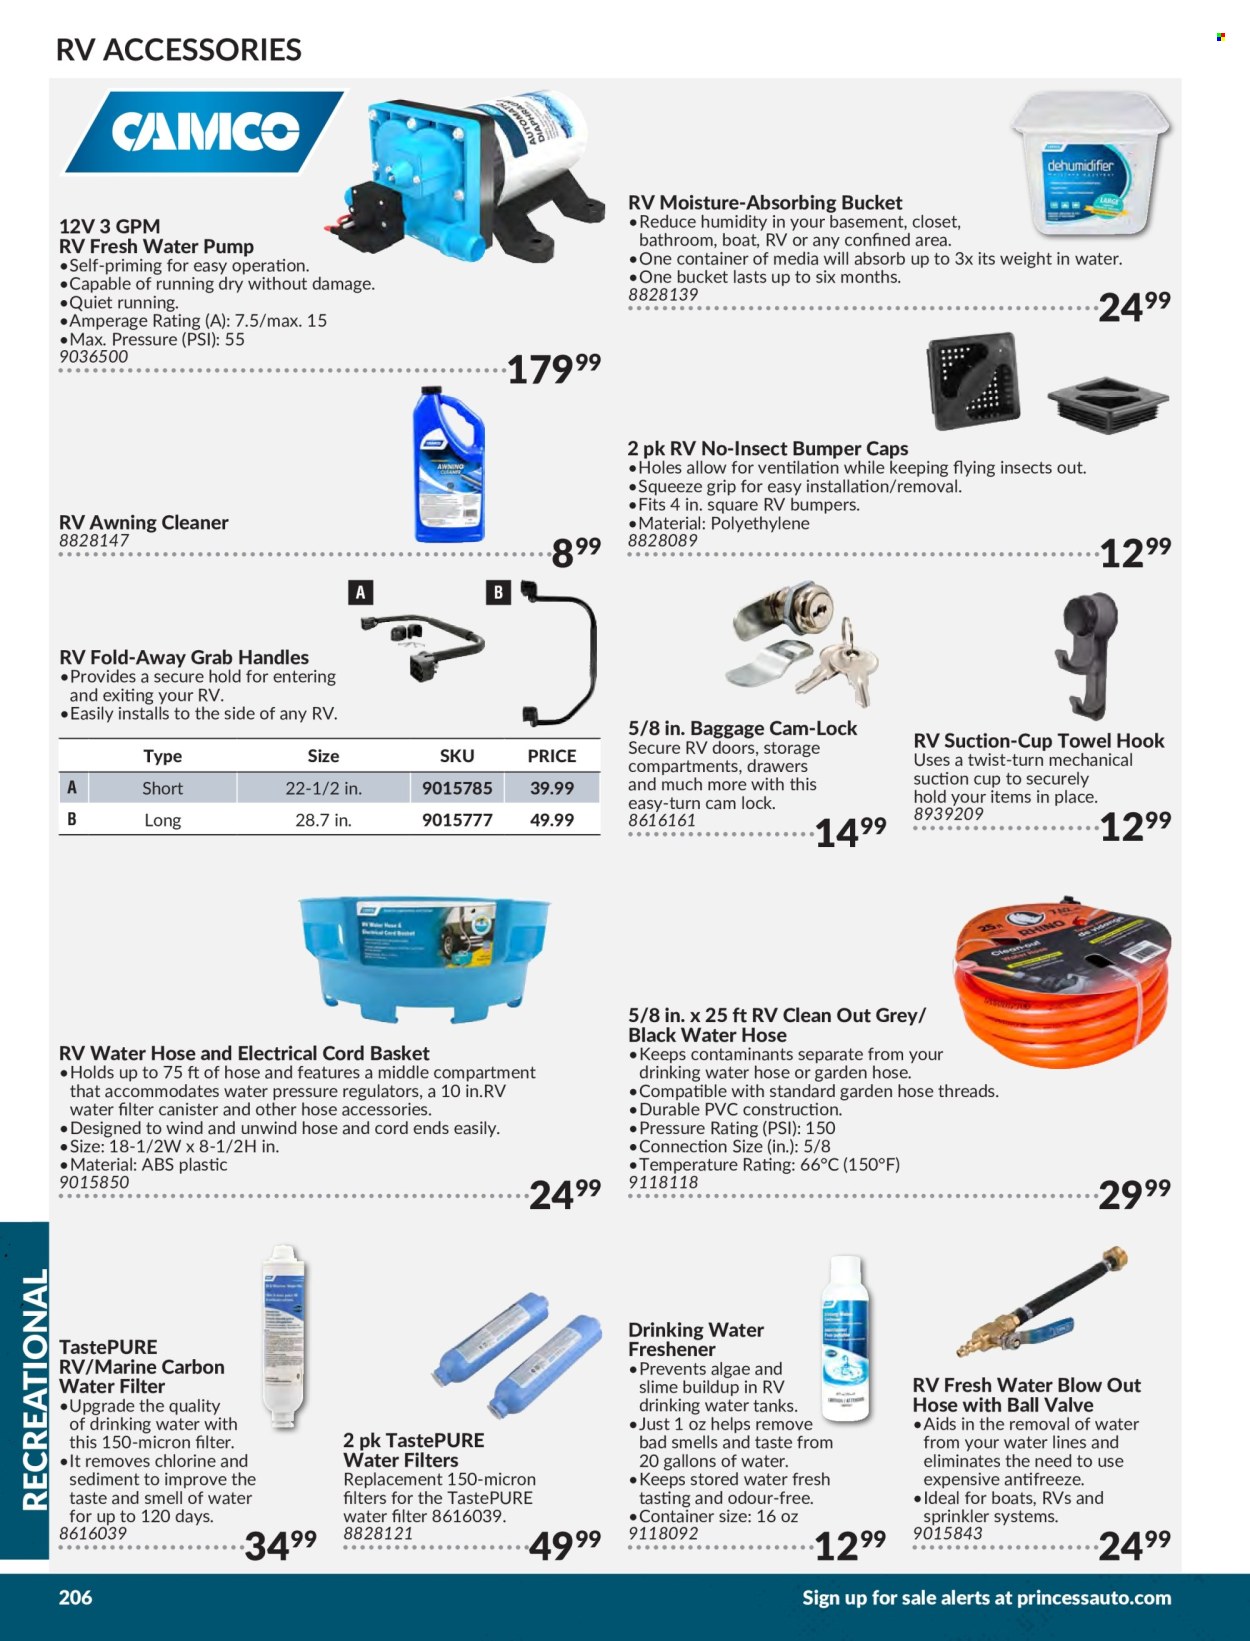 thumbnail - Princess Auto Flyer - Sales products - water tank, tank, hook, awning, basket, water filter, garden hose, container, garden sprinkler, hose accessories, canister, Slime, cleaner, antifreeze. Page 208.